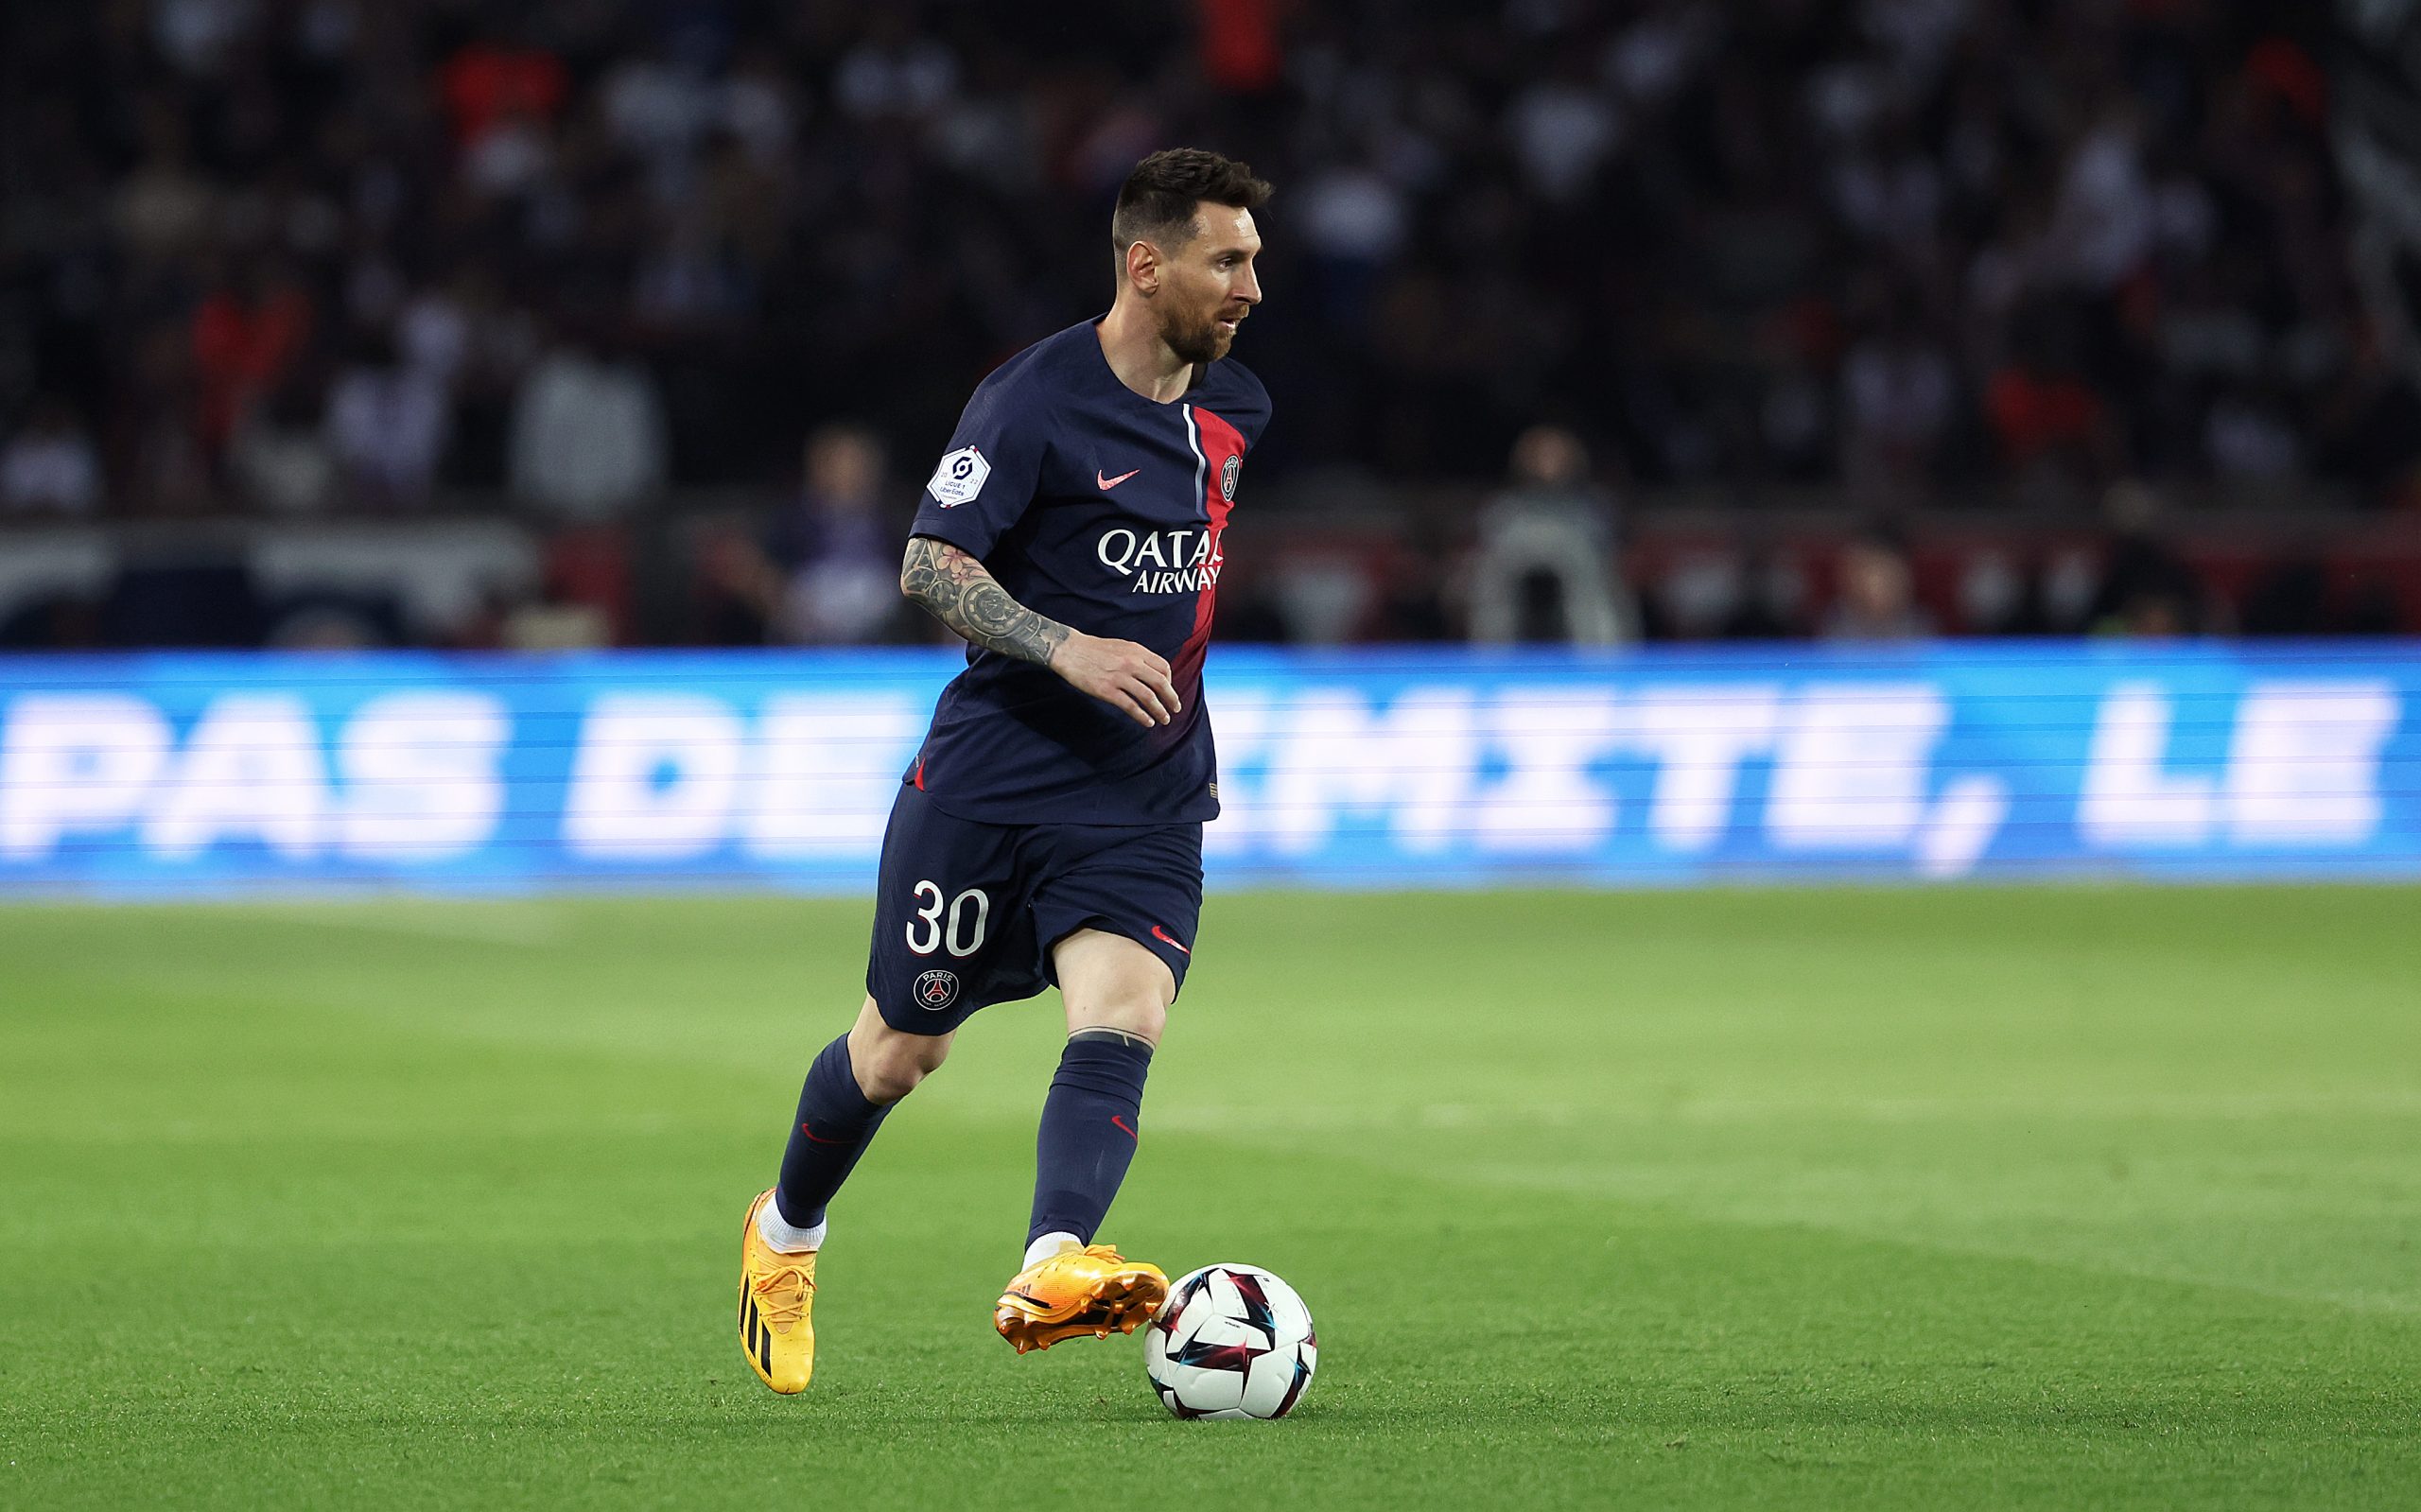 Lionel Messi linked to Barcelona